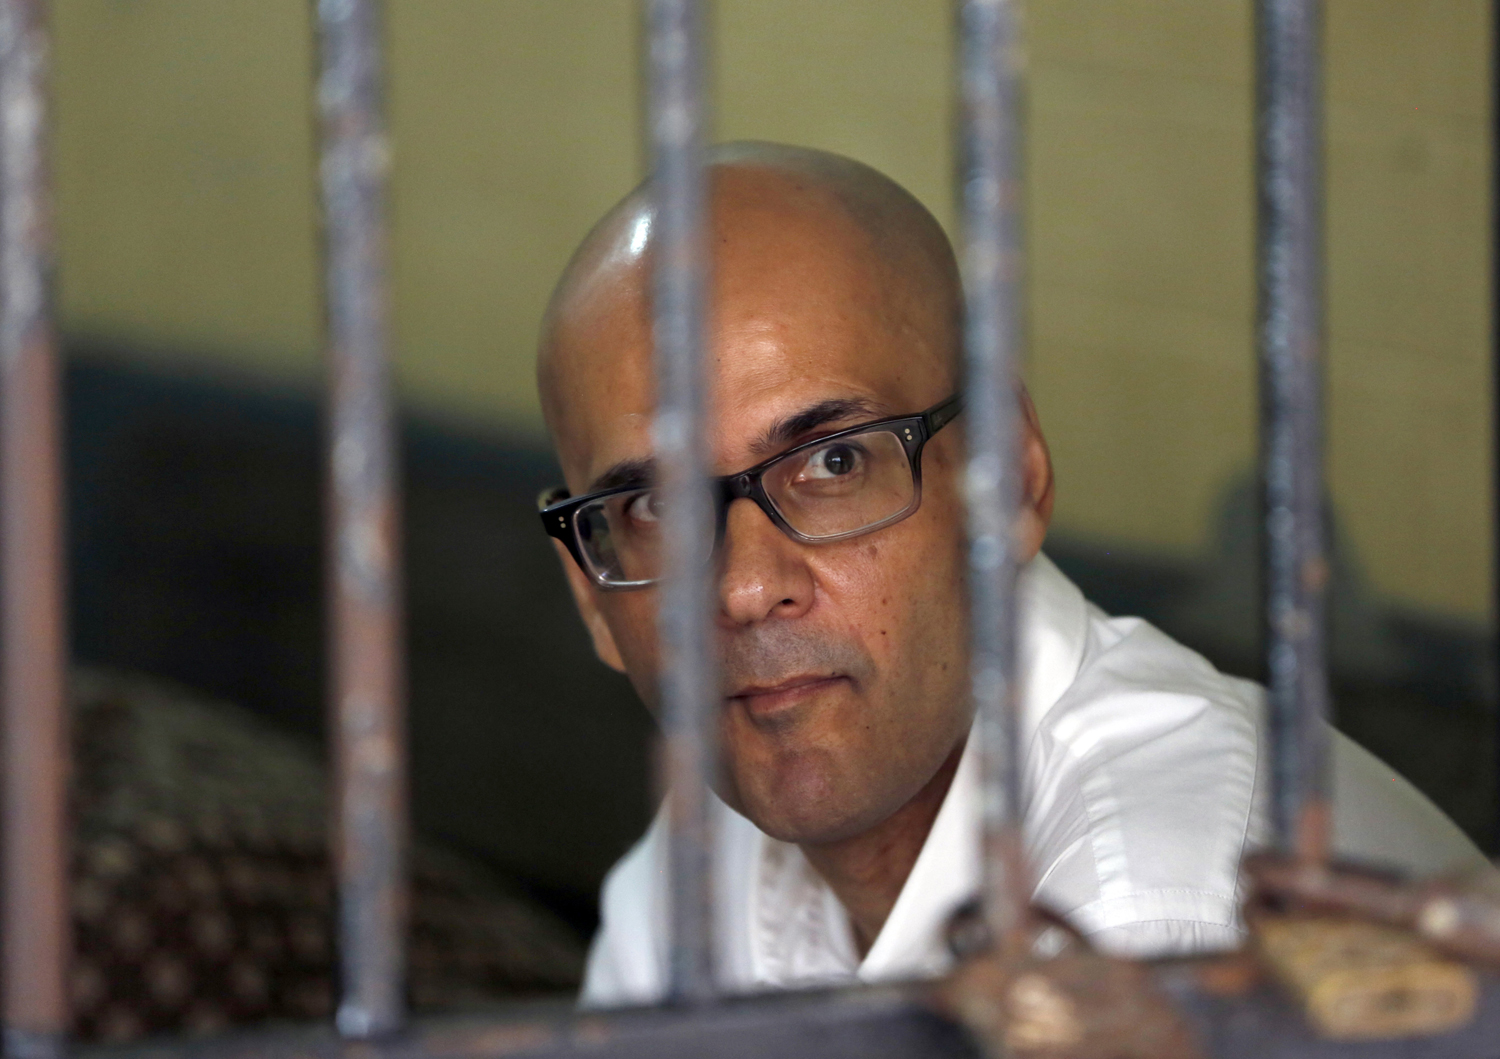 Canadian school administrator Neil Bantleman sits inside a holding cell prior to the start of his trial in Jakarta on March 12, 2015 (Dita Alangkara—AP)